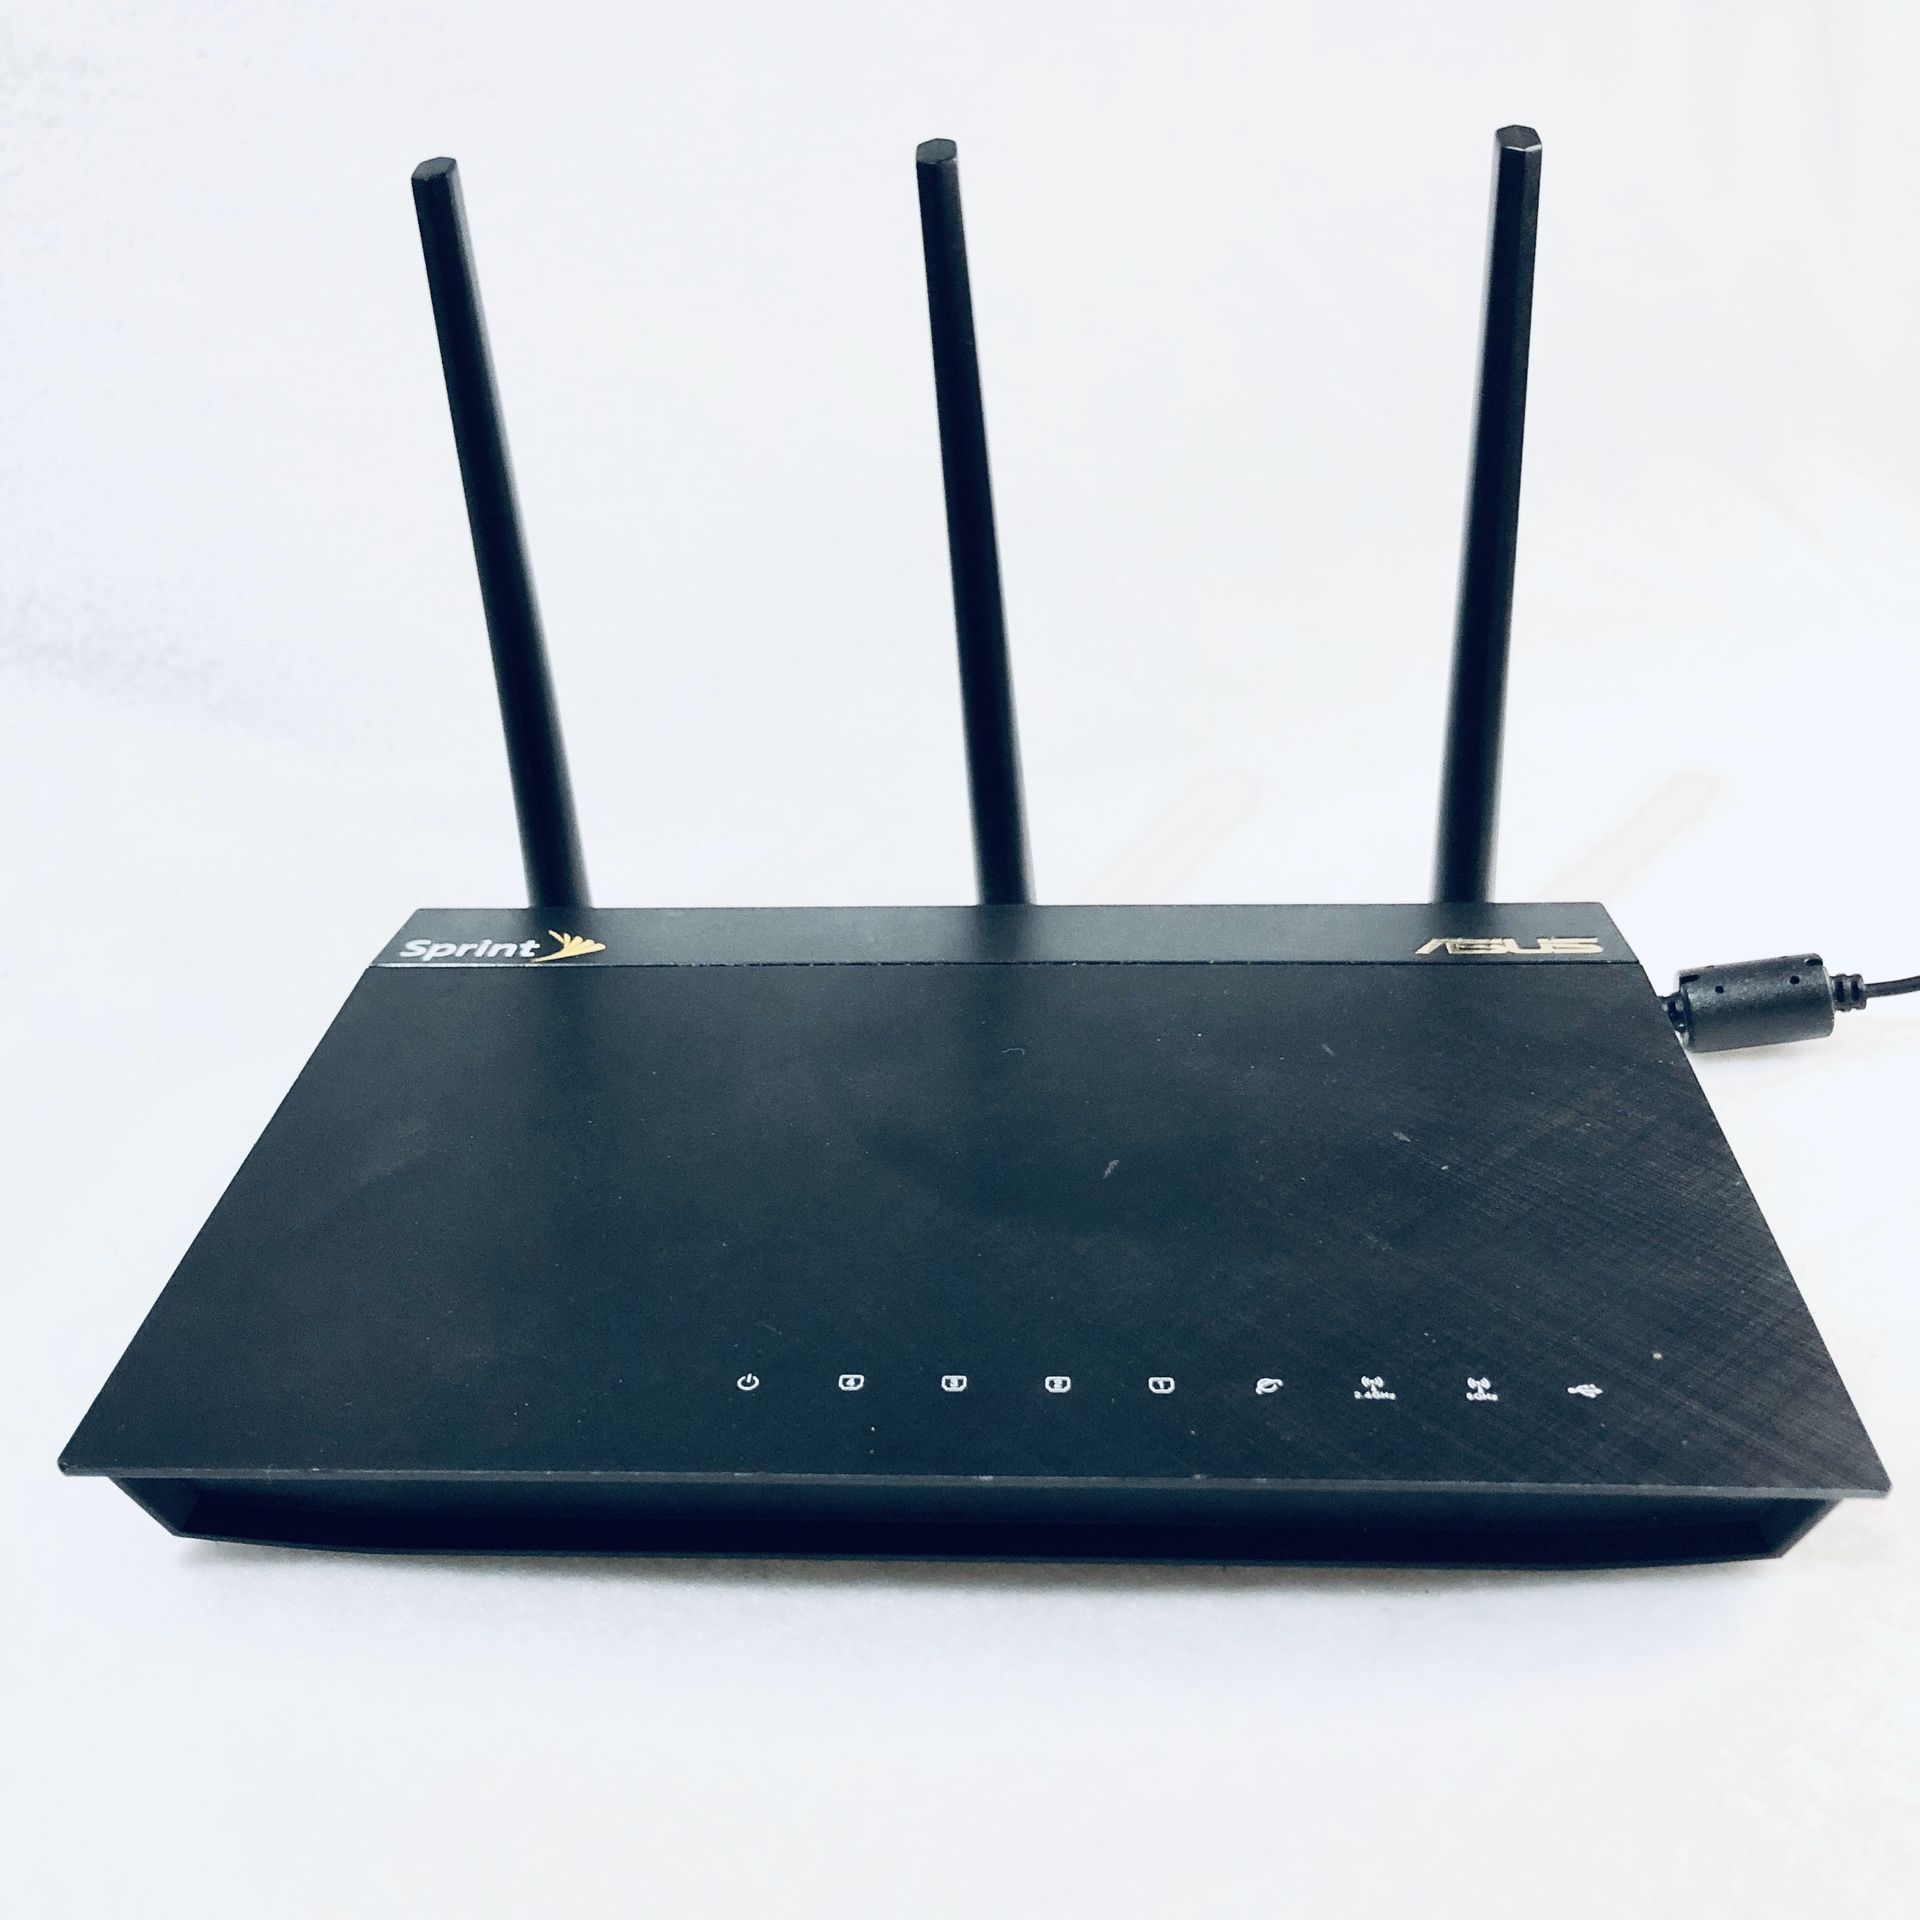 Asus Wi-Fi Router Dual Band gaming through wall high speed wireless internet